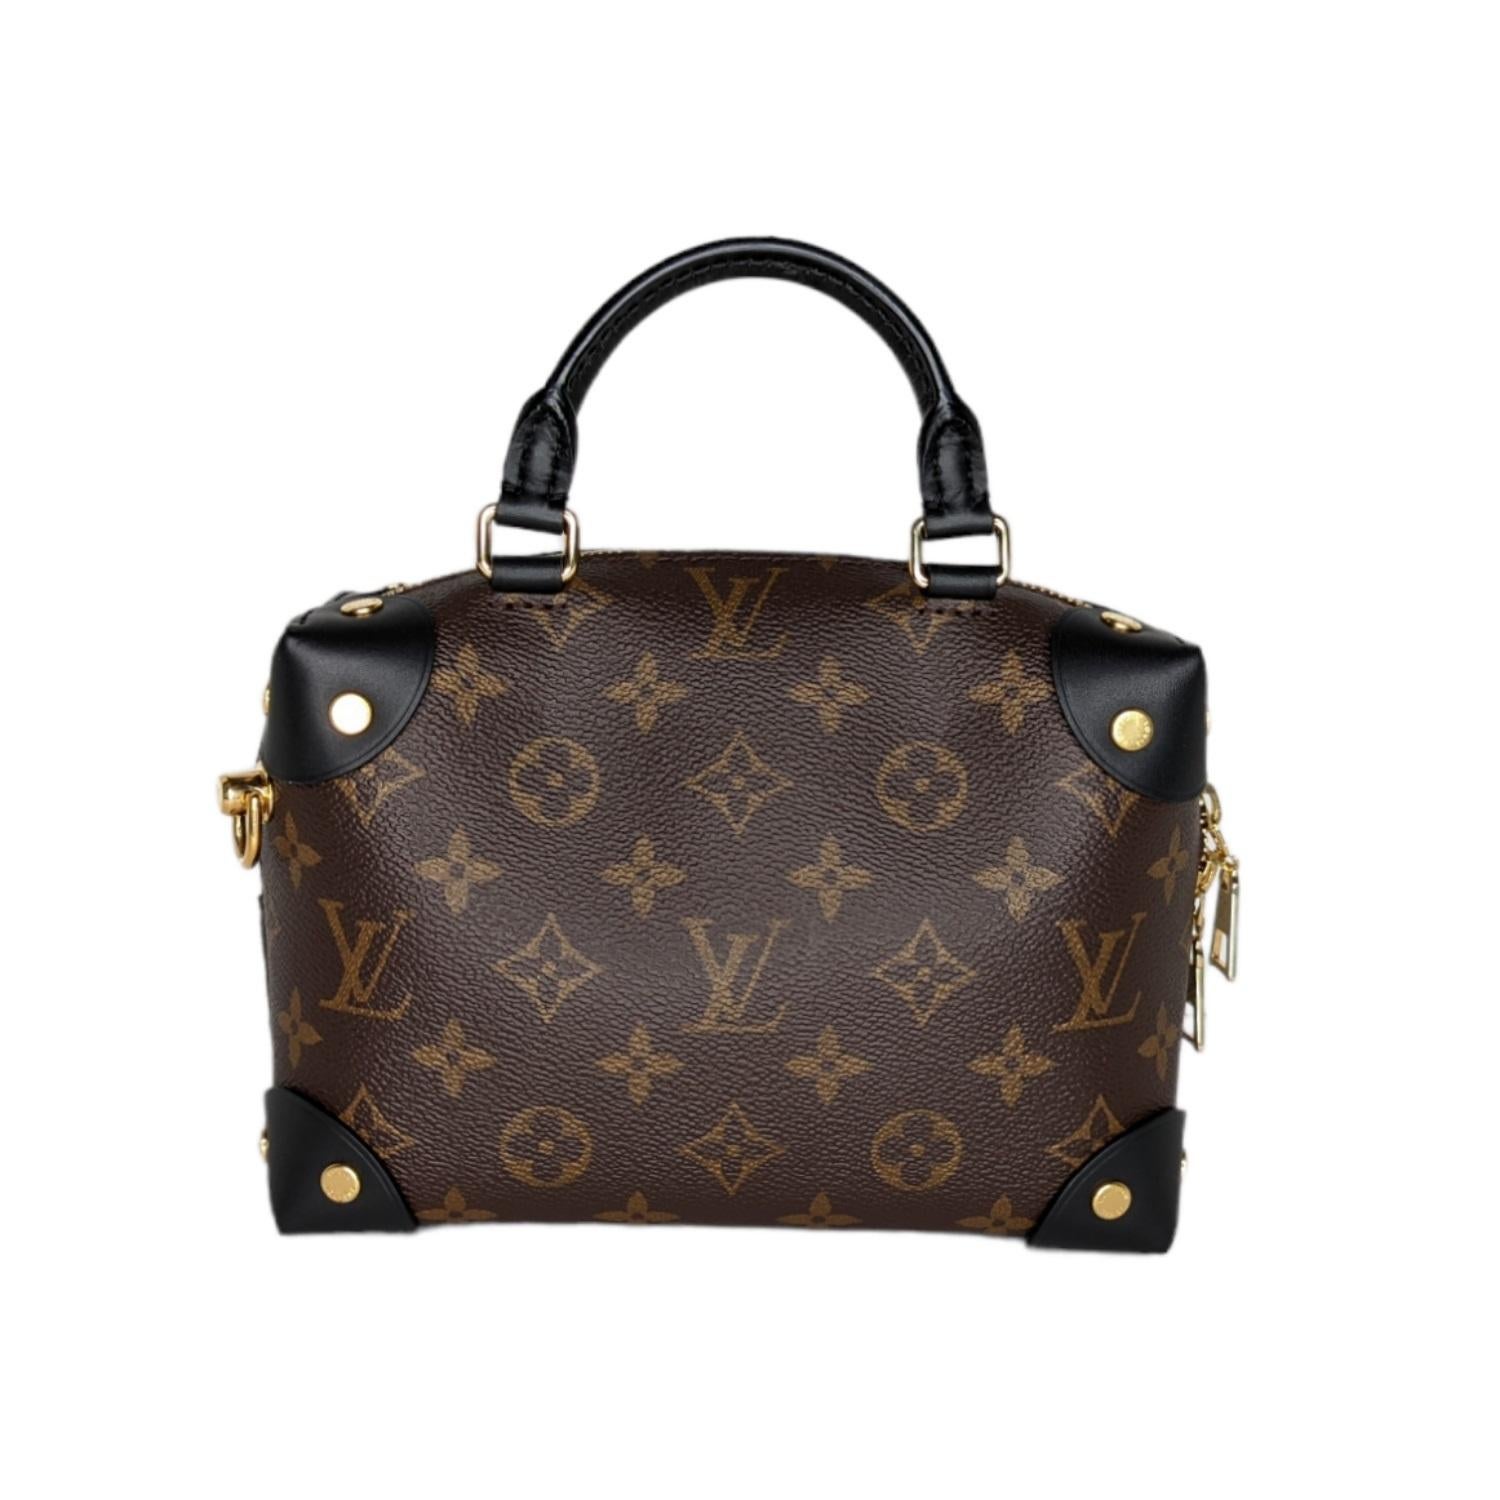 This stylish handbag is crafted of Louis Vuitton monogram toile canvas, with black leather corner details. The bag features a gold chain shoulder strap with polished brass hardware. The top zipper opens to a black microfiber interior with a zipper